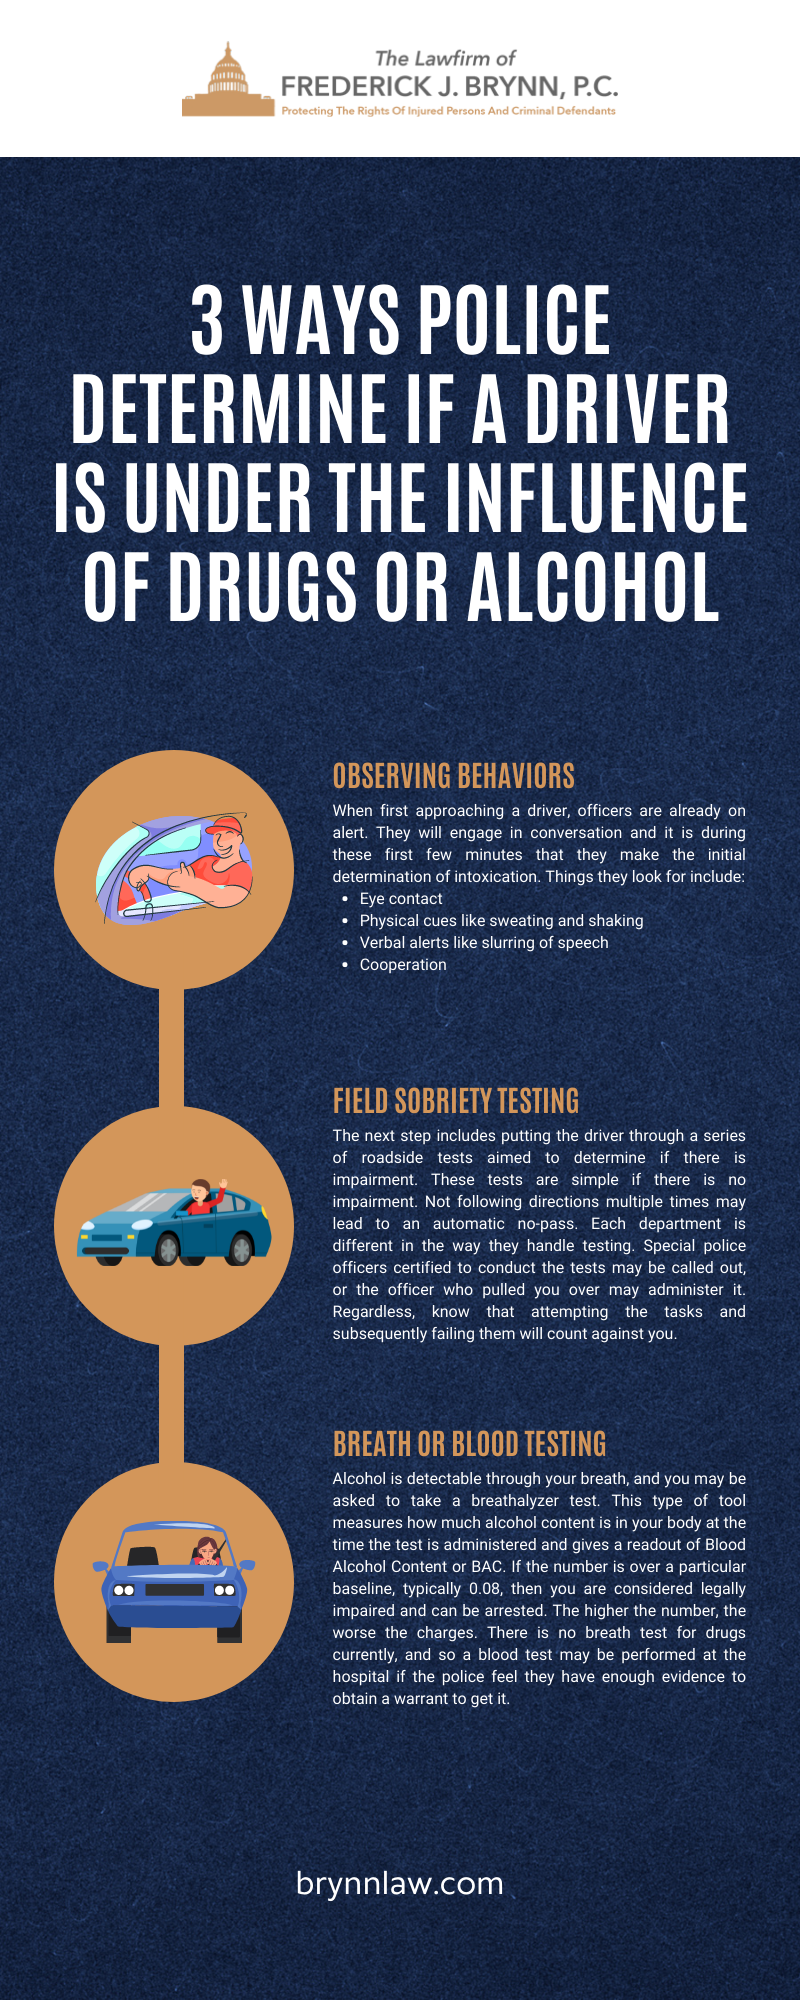 3 Ways Police Determine If a Driver Is Under The Influence of Drugs or Alcohol infographic